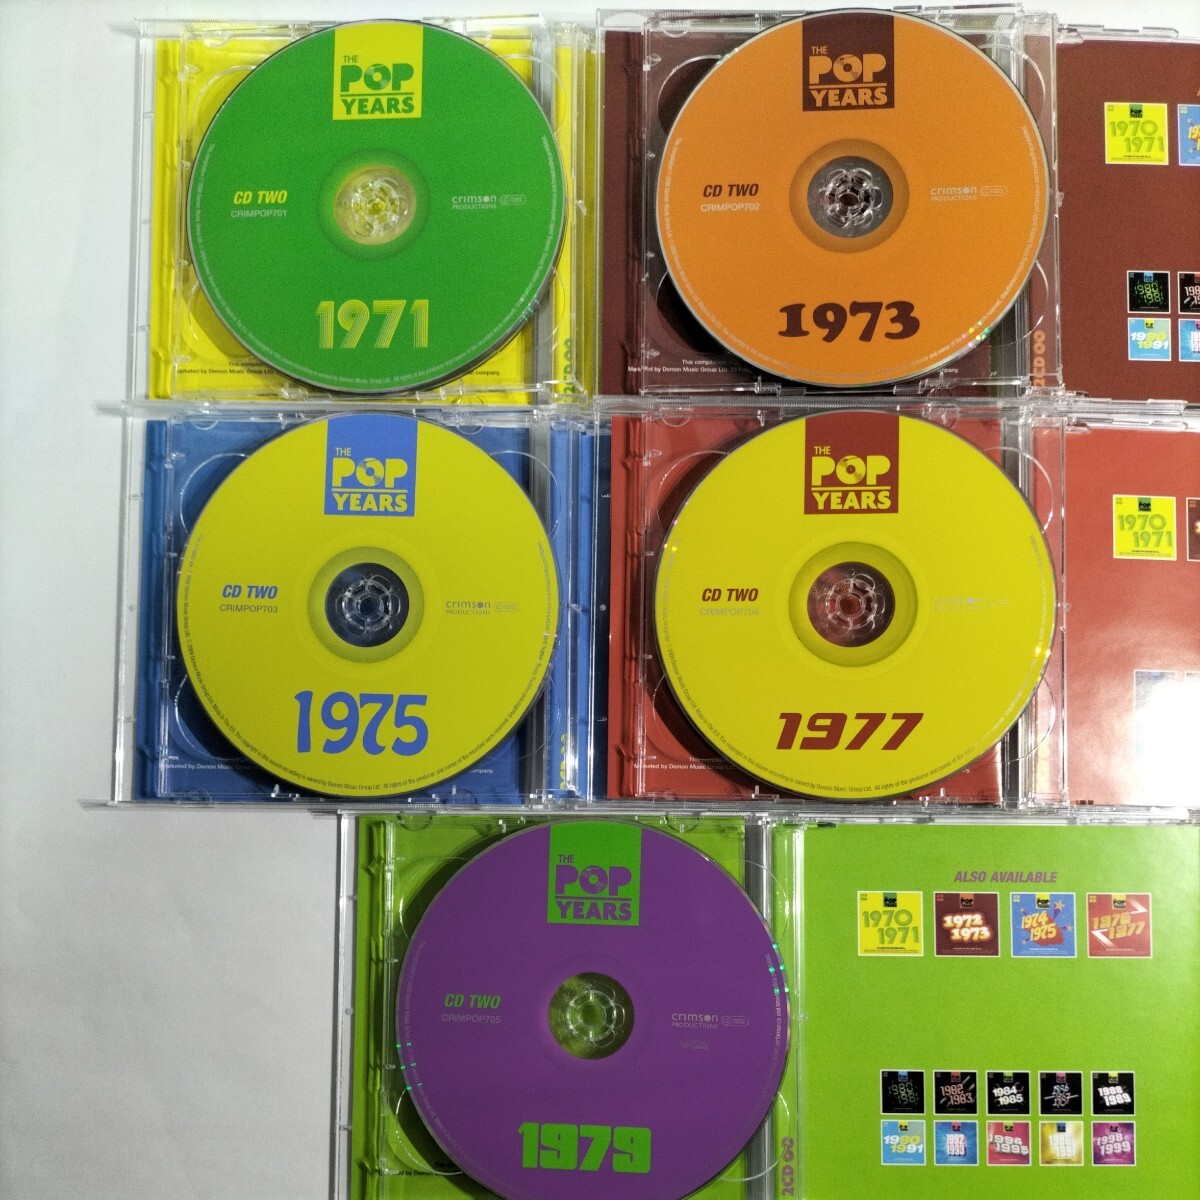 「THE POP YEARS - Classic Pop Hits From 70s - 」2CD×5セット 全10枚 全200曲 70’s 洋楽 ヒット ロック ポップス オムニバスの画像3